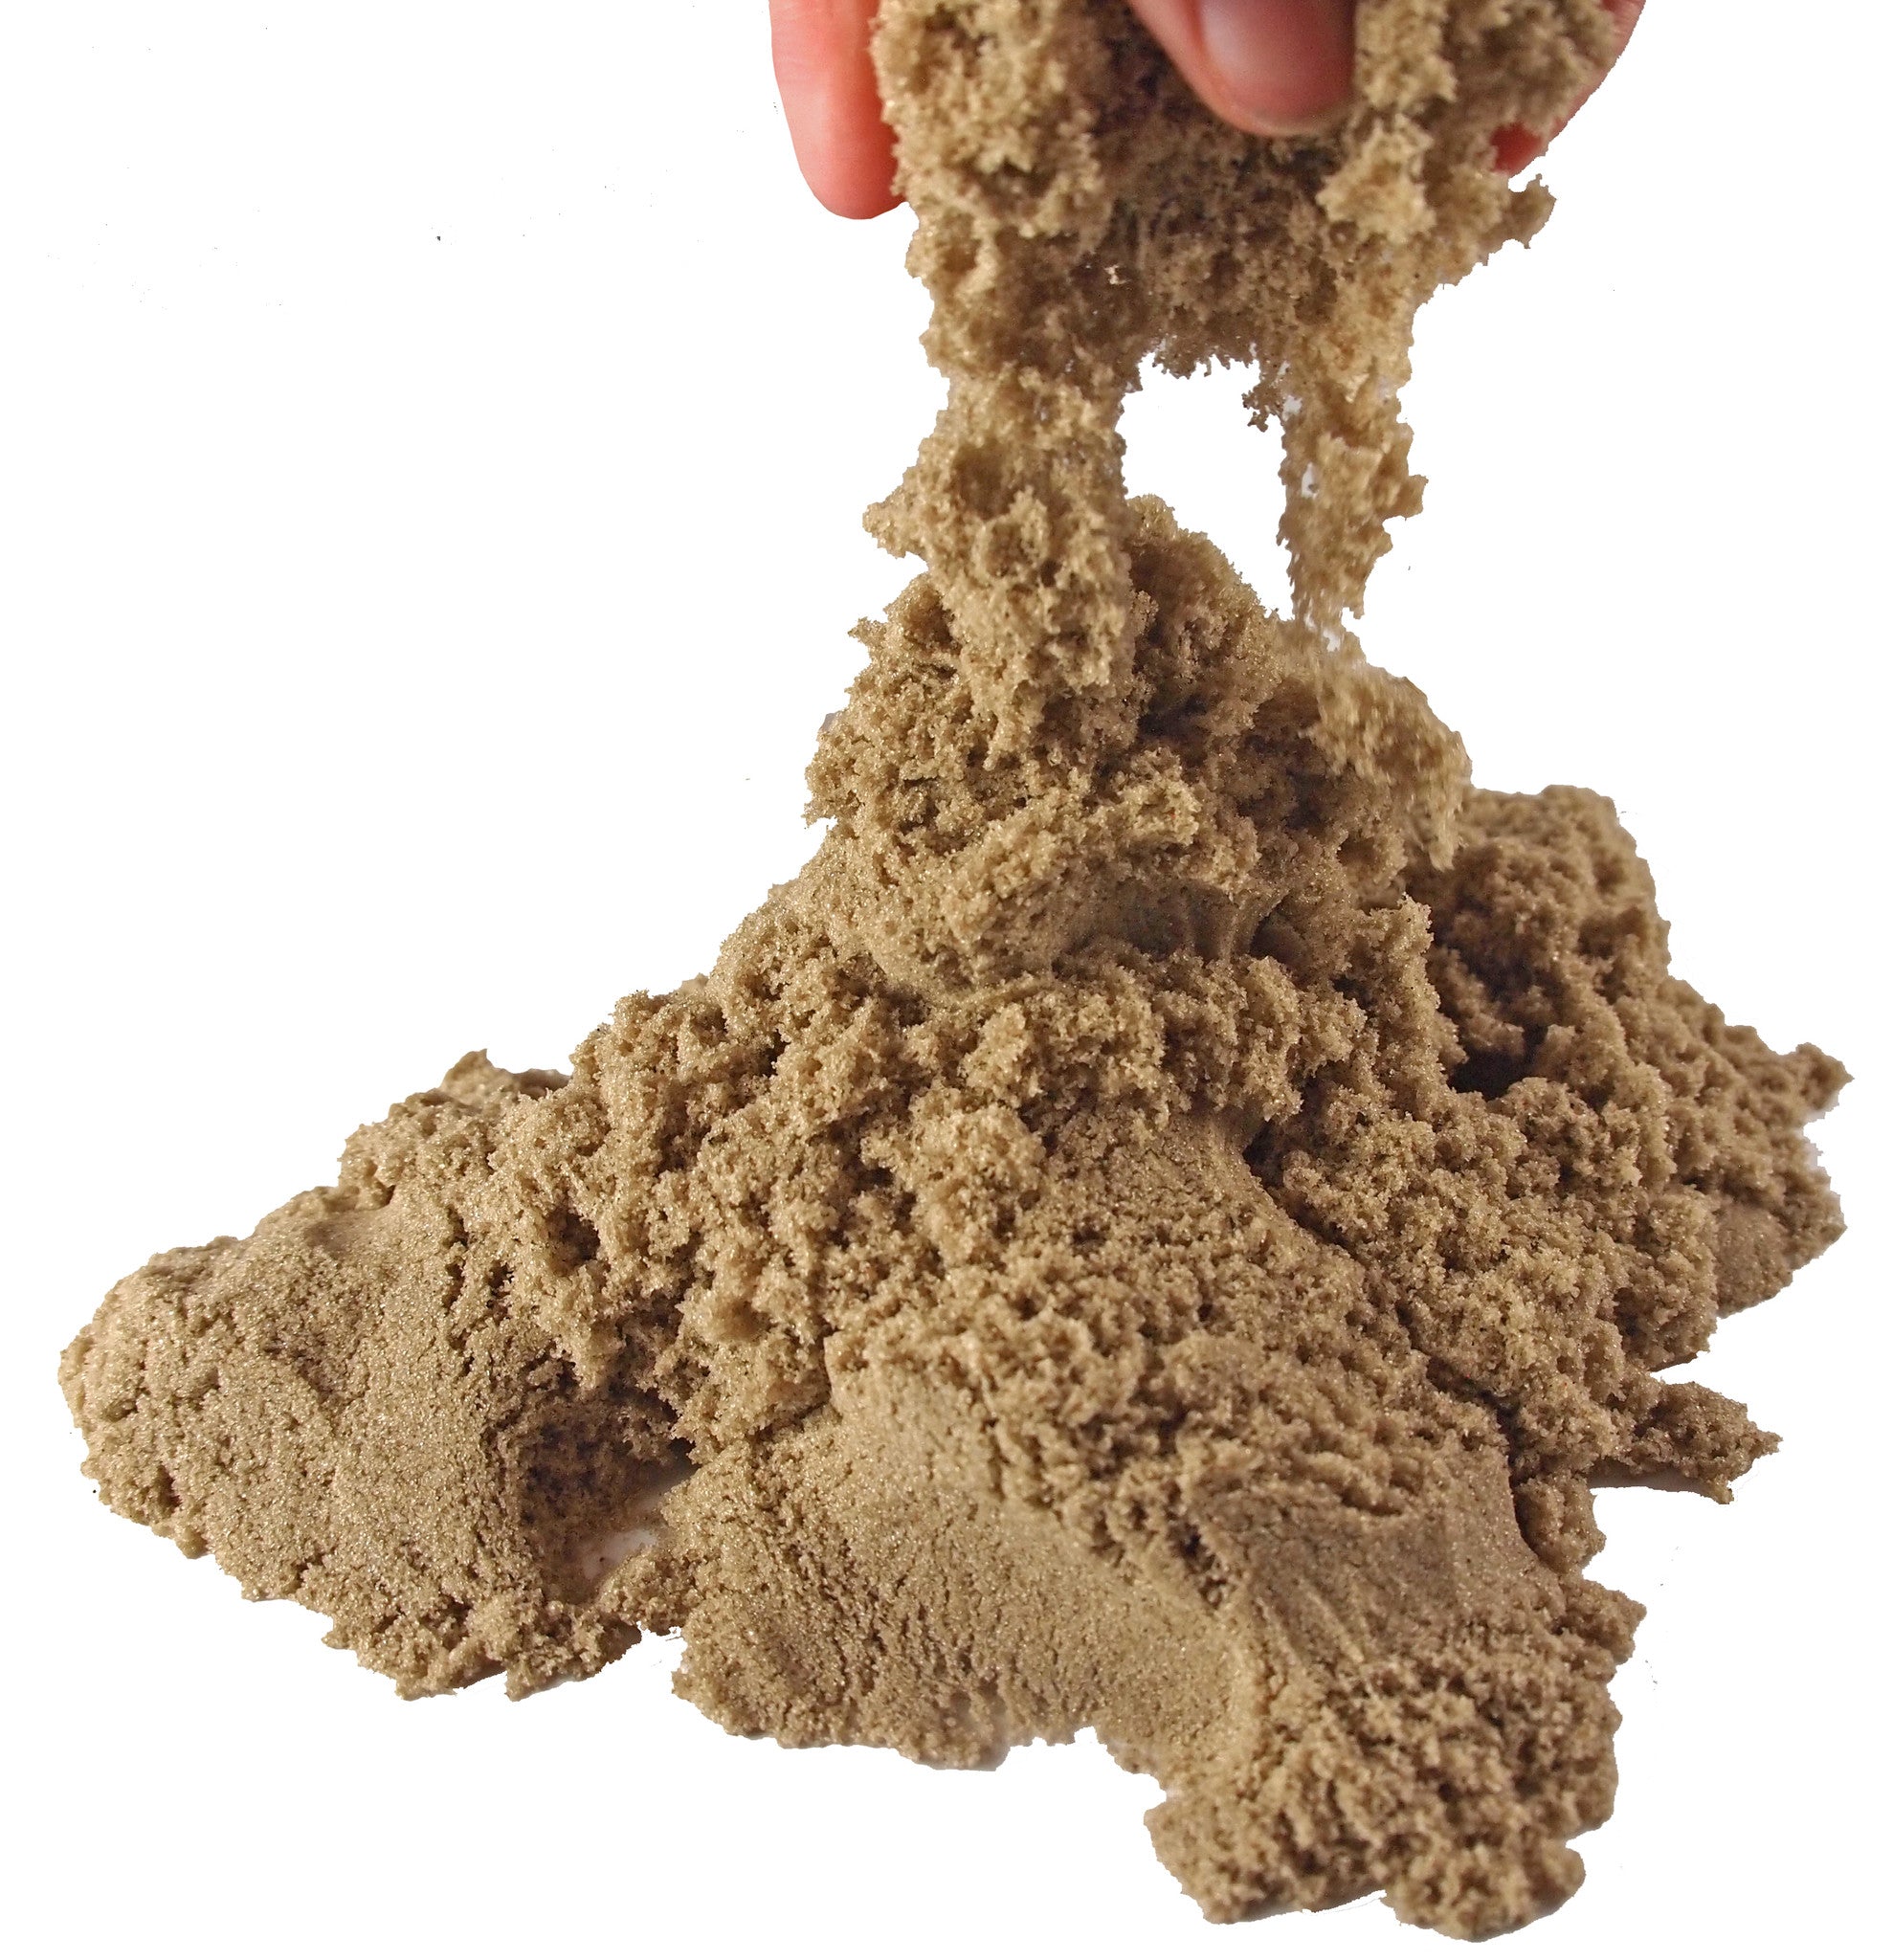 age for kinetic sand